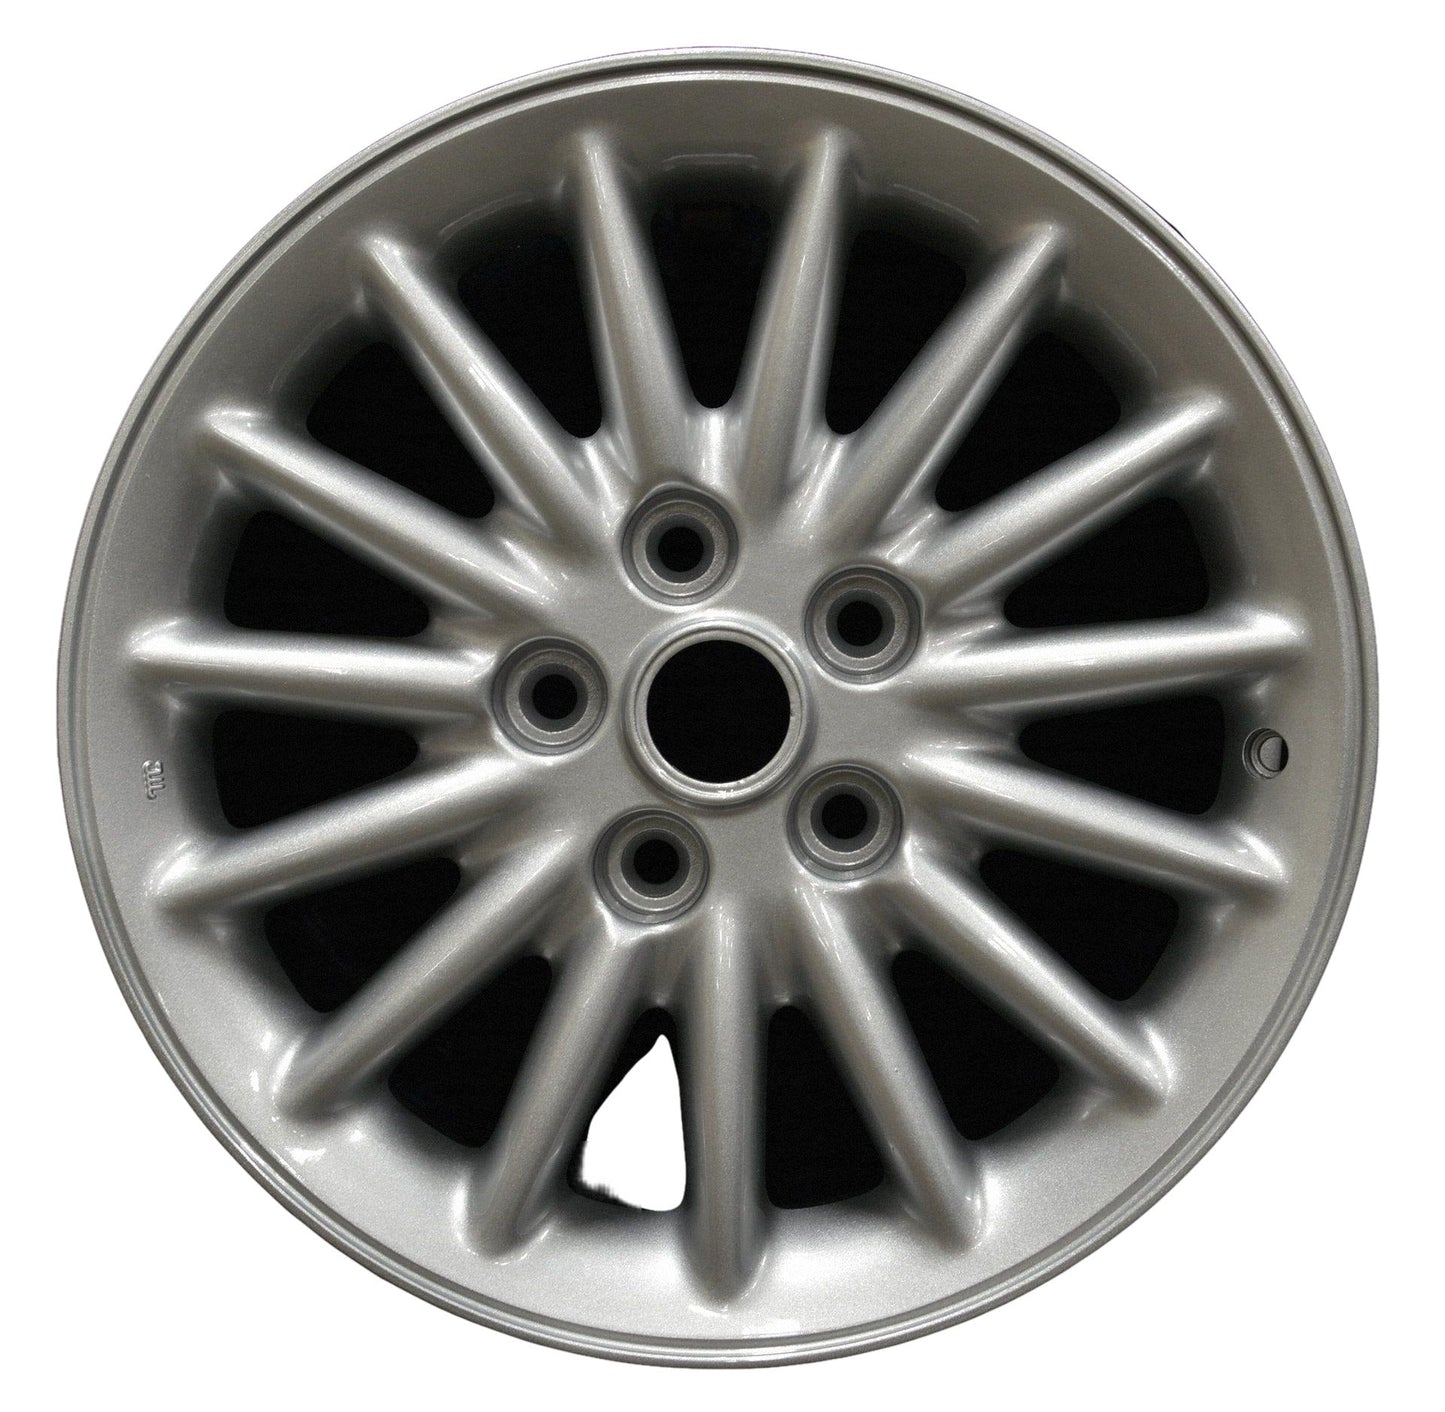 Chrysler Concorde  1998, 1999, 2000, 2001 Factory OEM Car Wheel Size 16x7 Alloy WAO.2091.PS02.FF